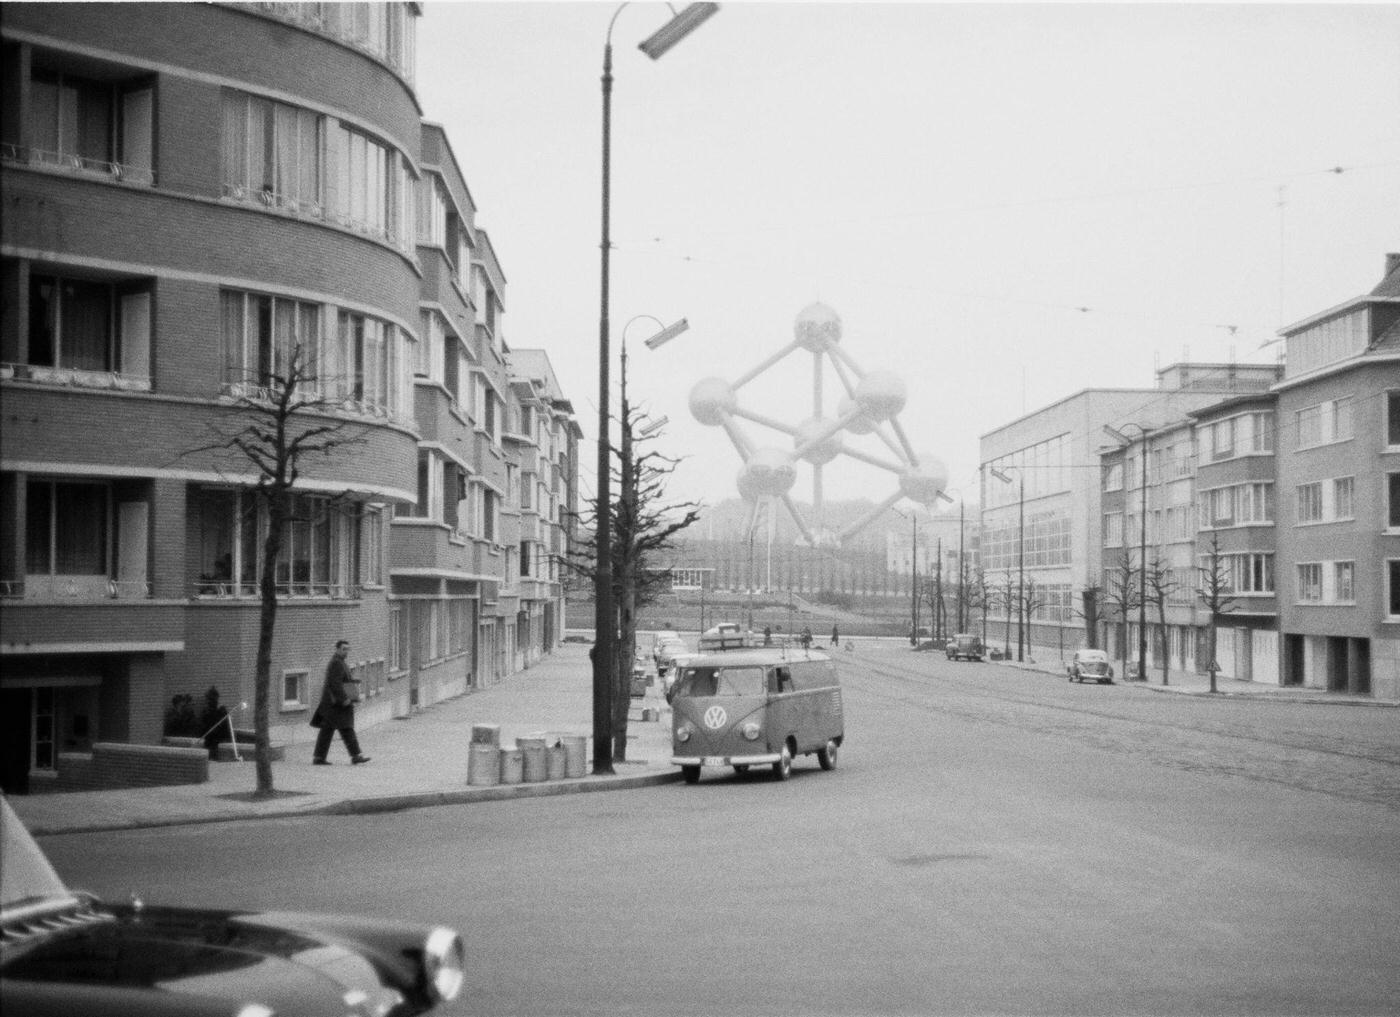 A street in Brussels, Belgium with the Atomium visible at the far end, 1959.